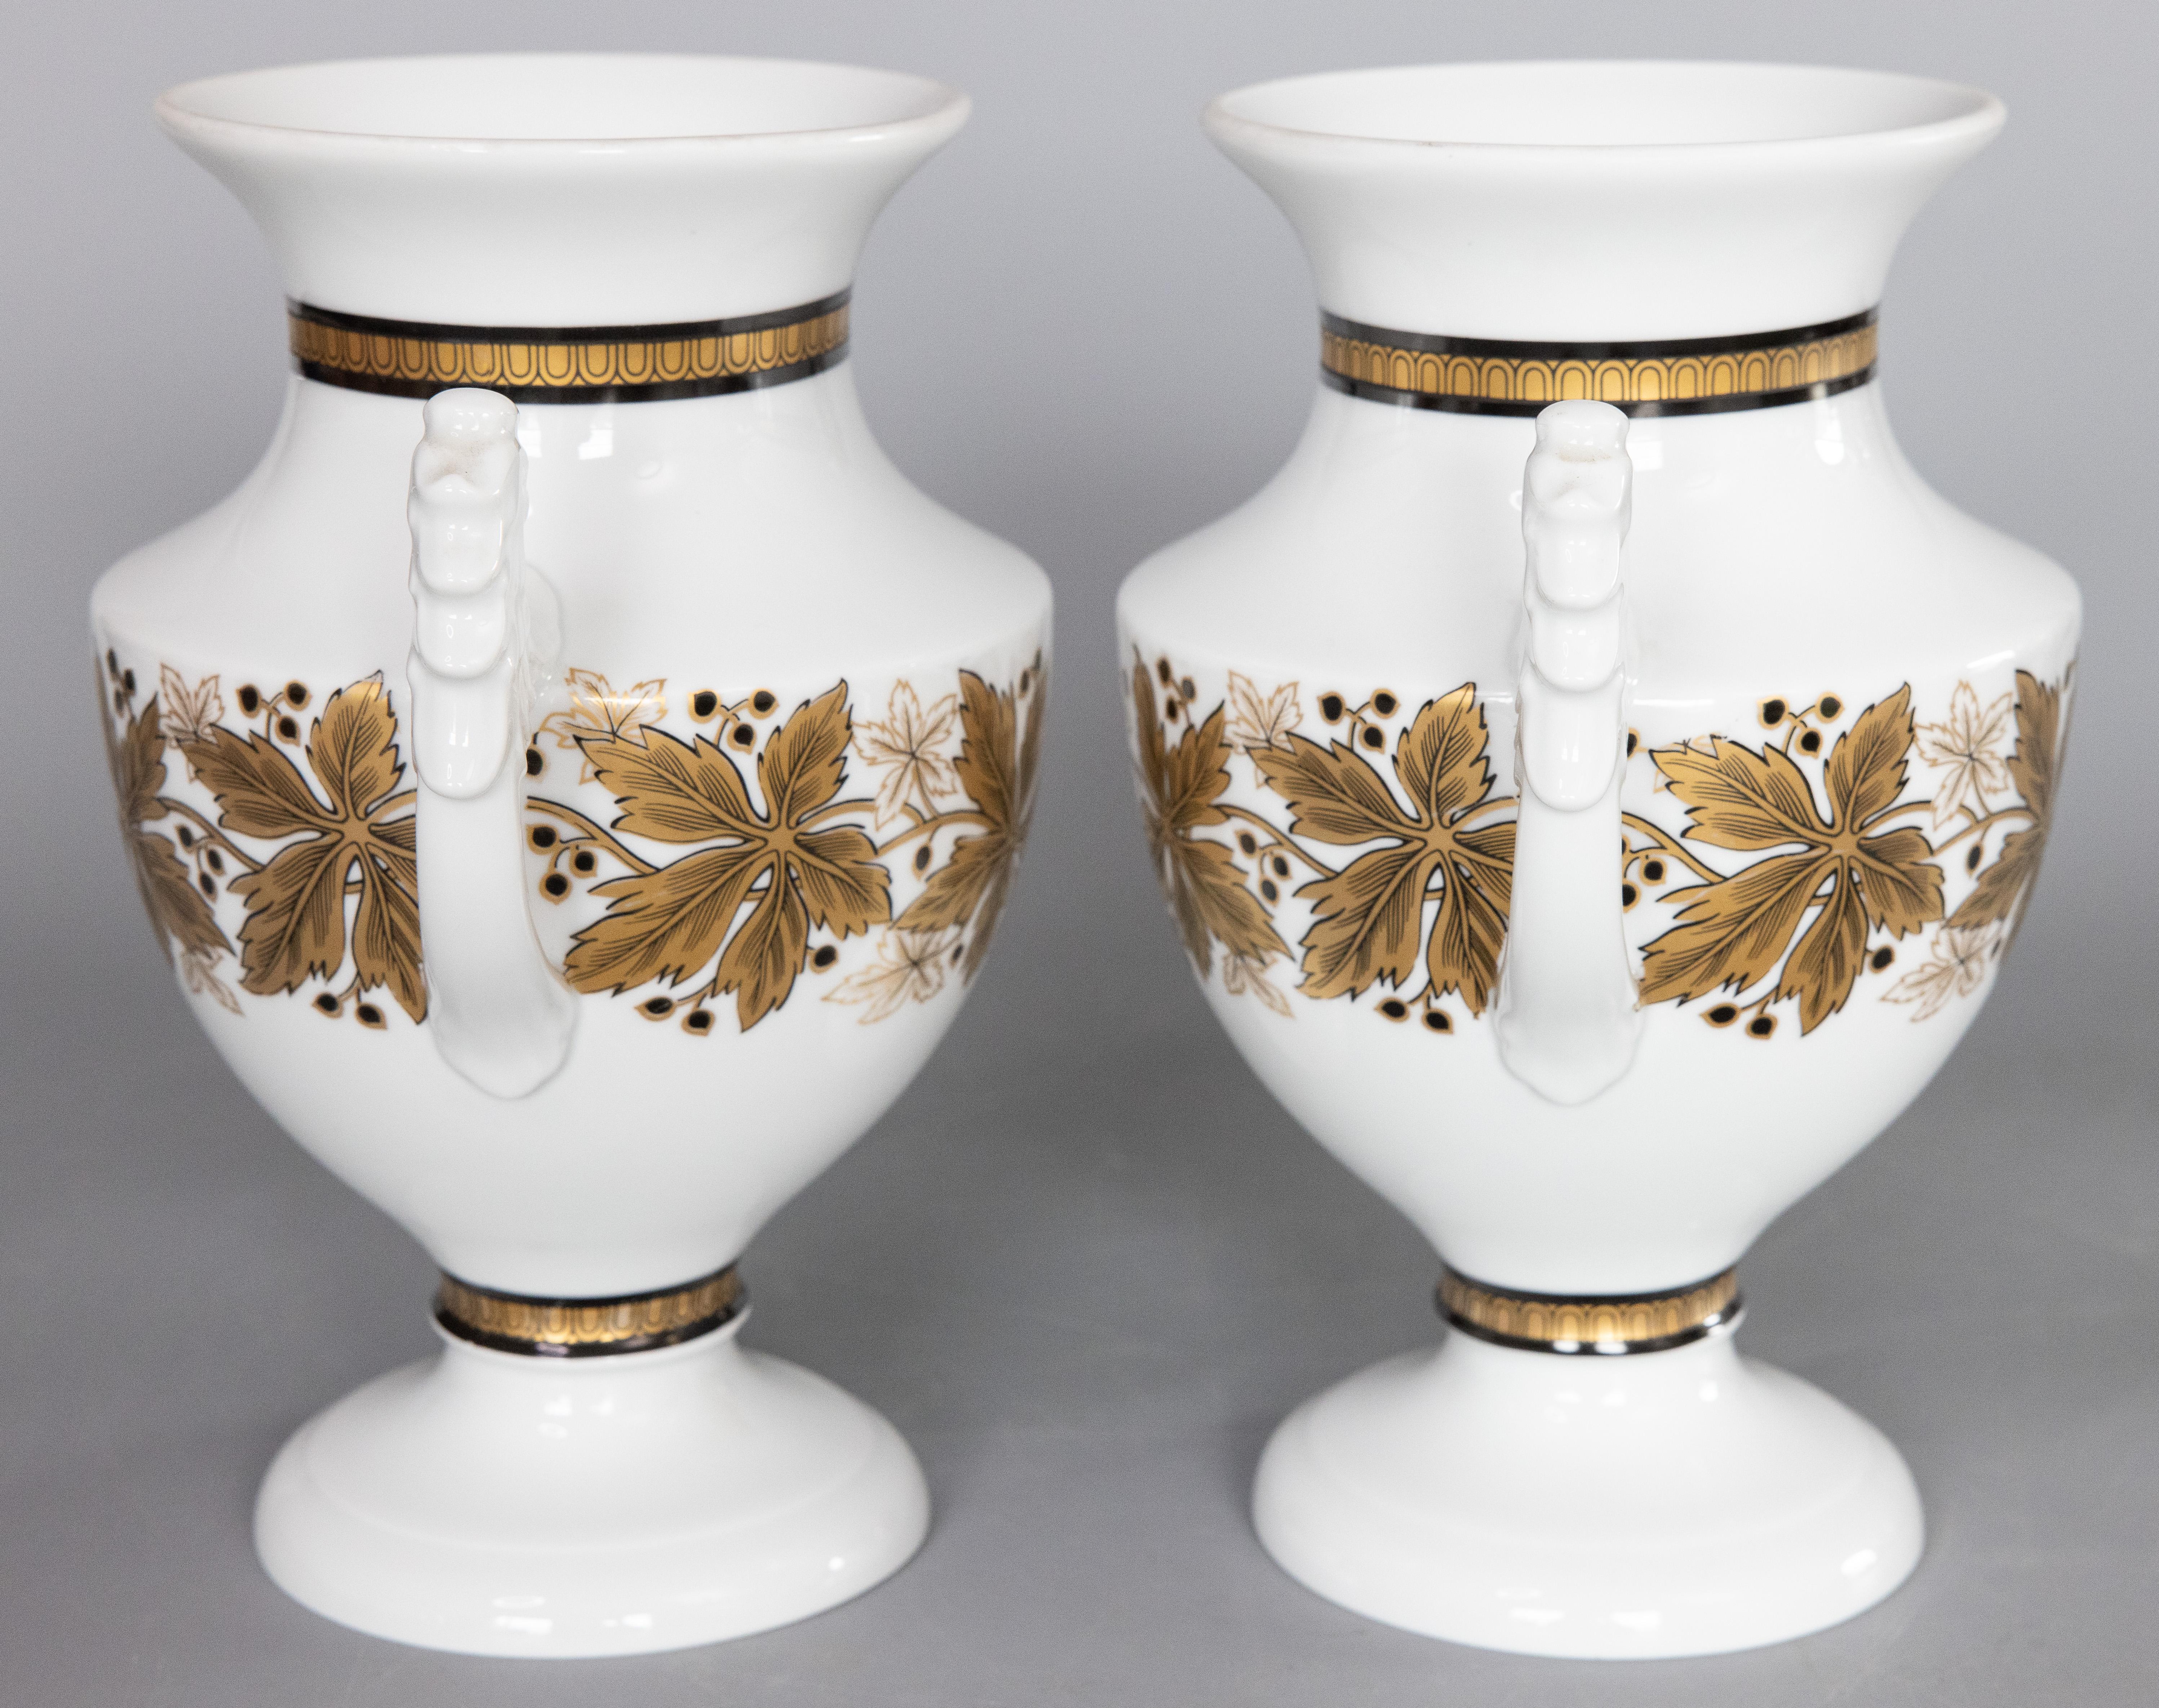 Pair of Neoclassical Royal Tettau German Porcelain White & Gold Urns c. 1930-50 In Good Condition For Sale In Pearland, TX